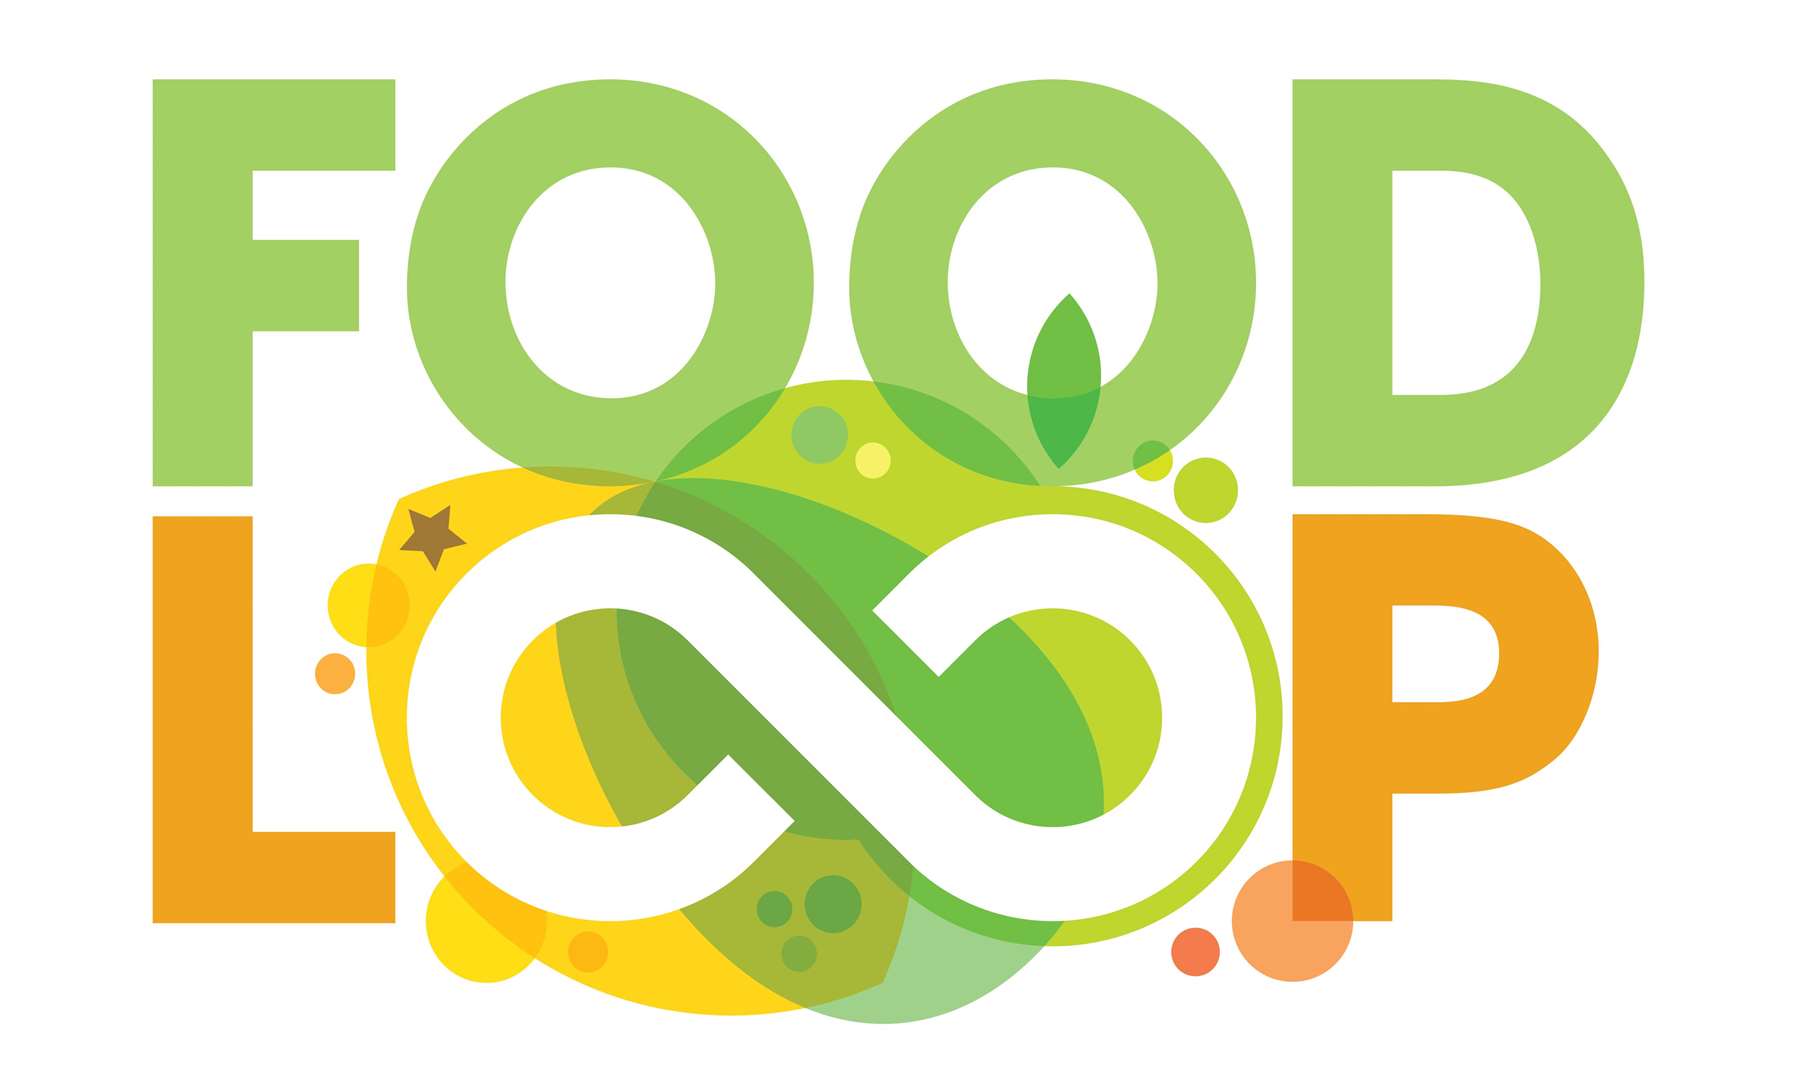 Firms can now register, for free, for the 12 month trial of FoodLoop